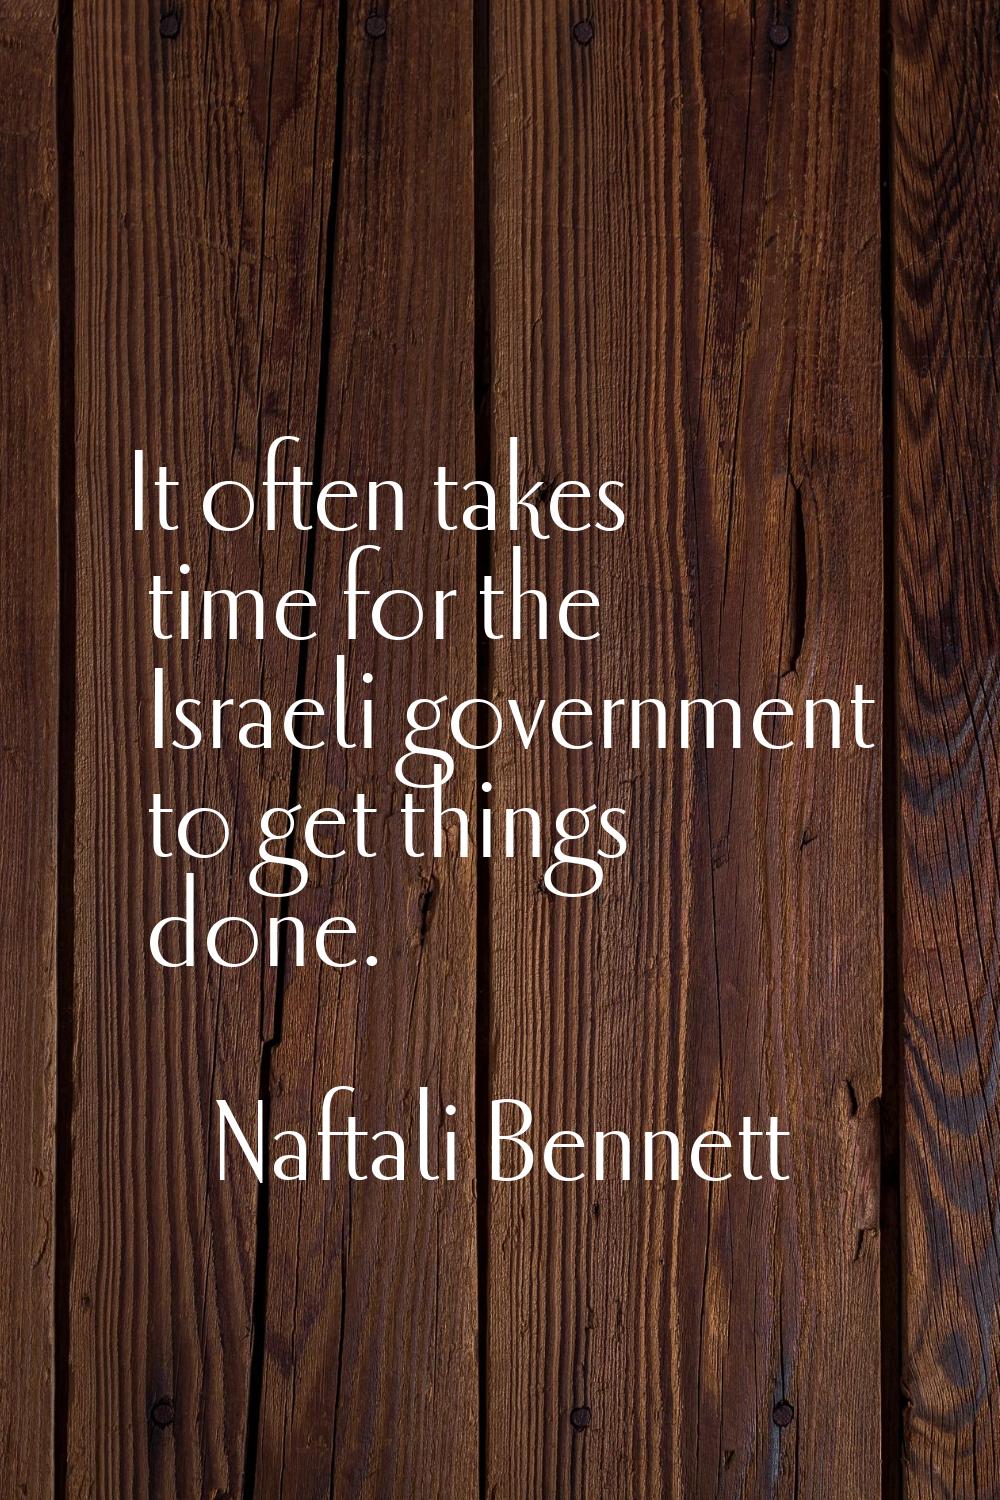 It often takes time for the Israeli government to get things done.